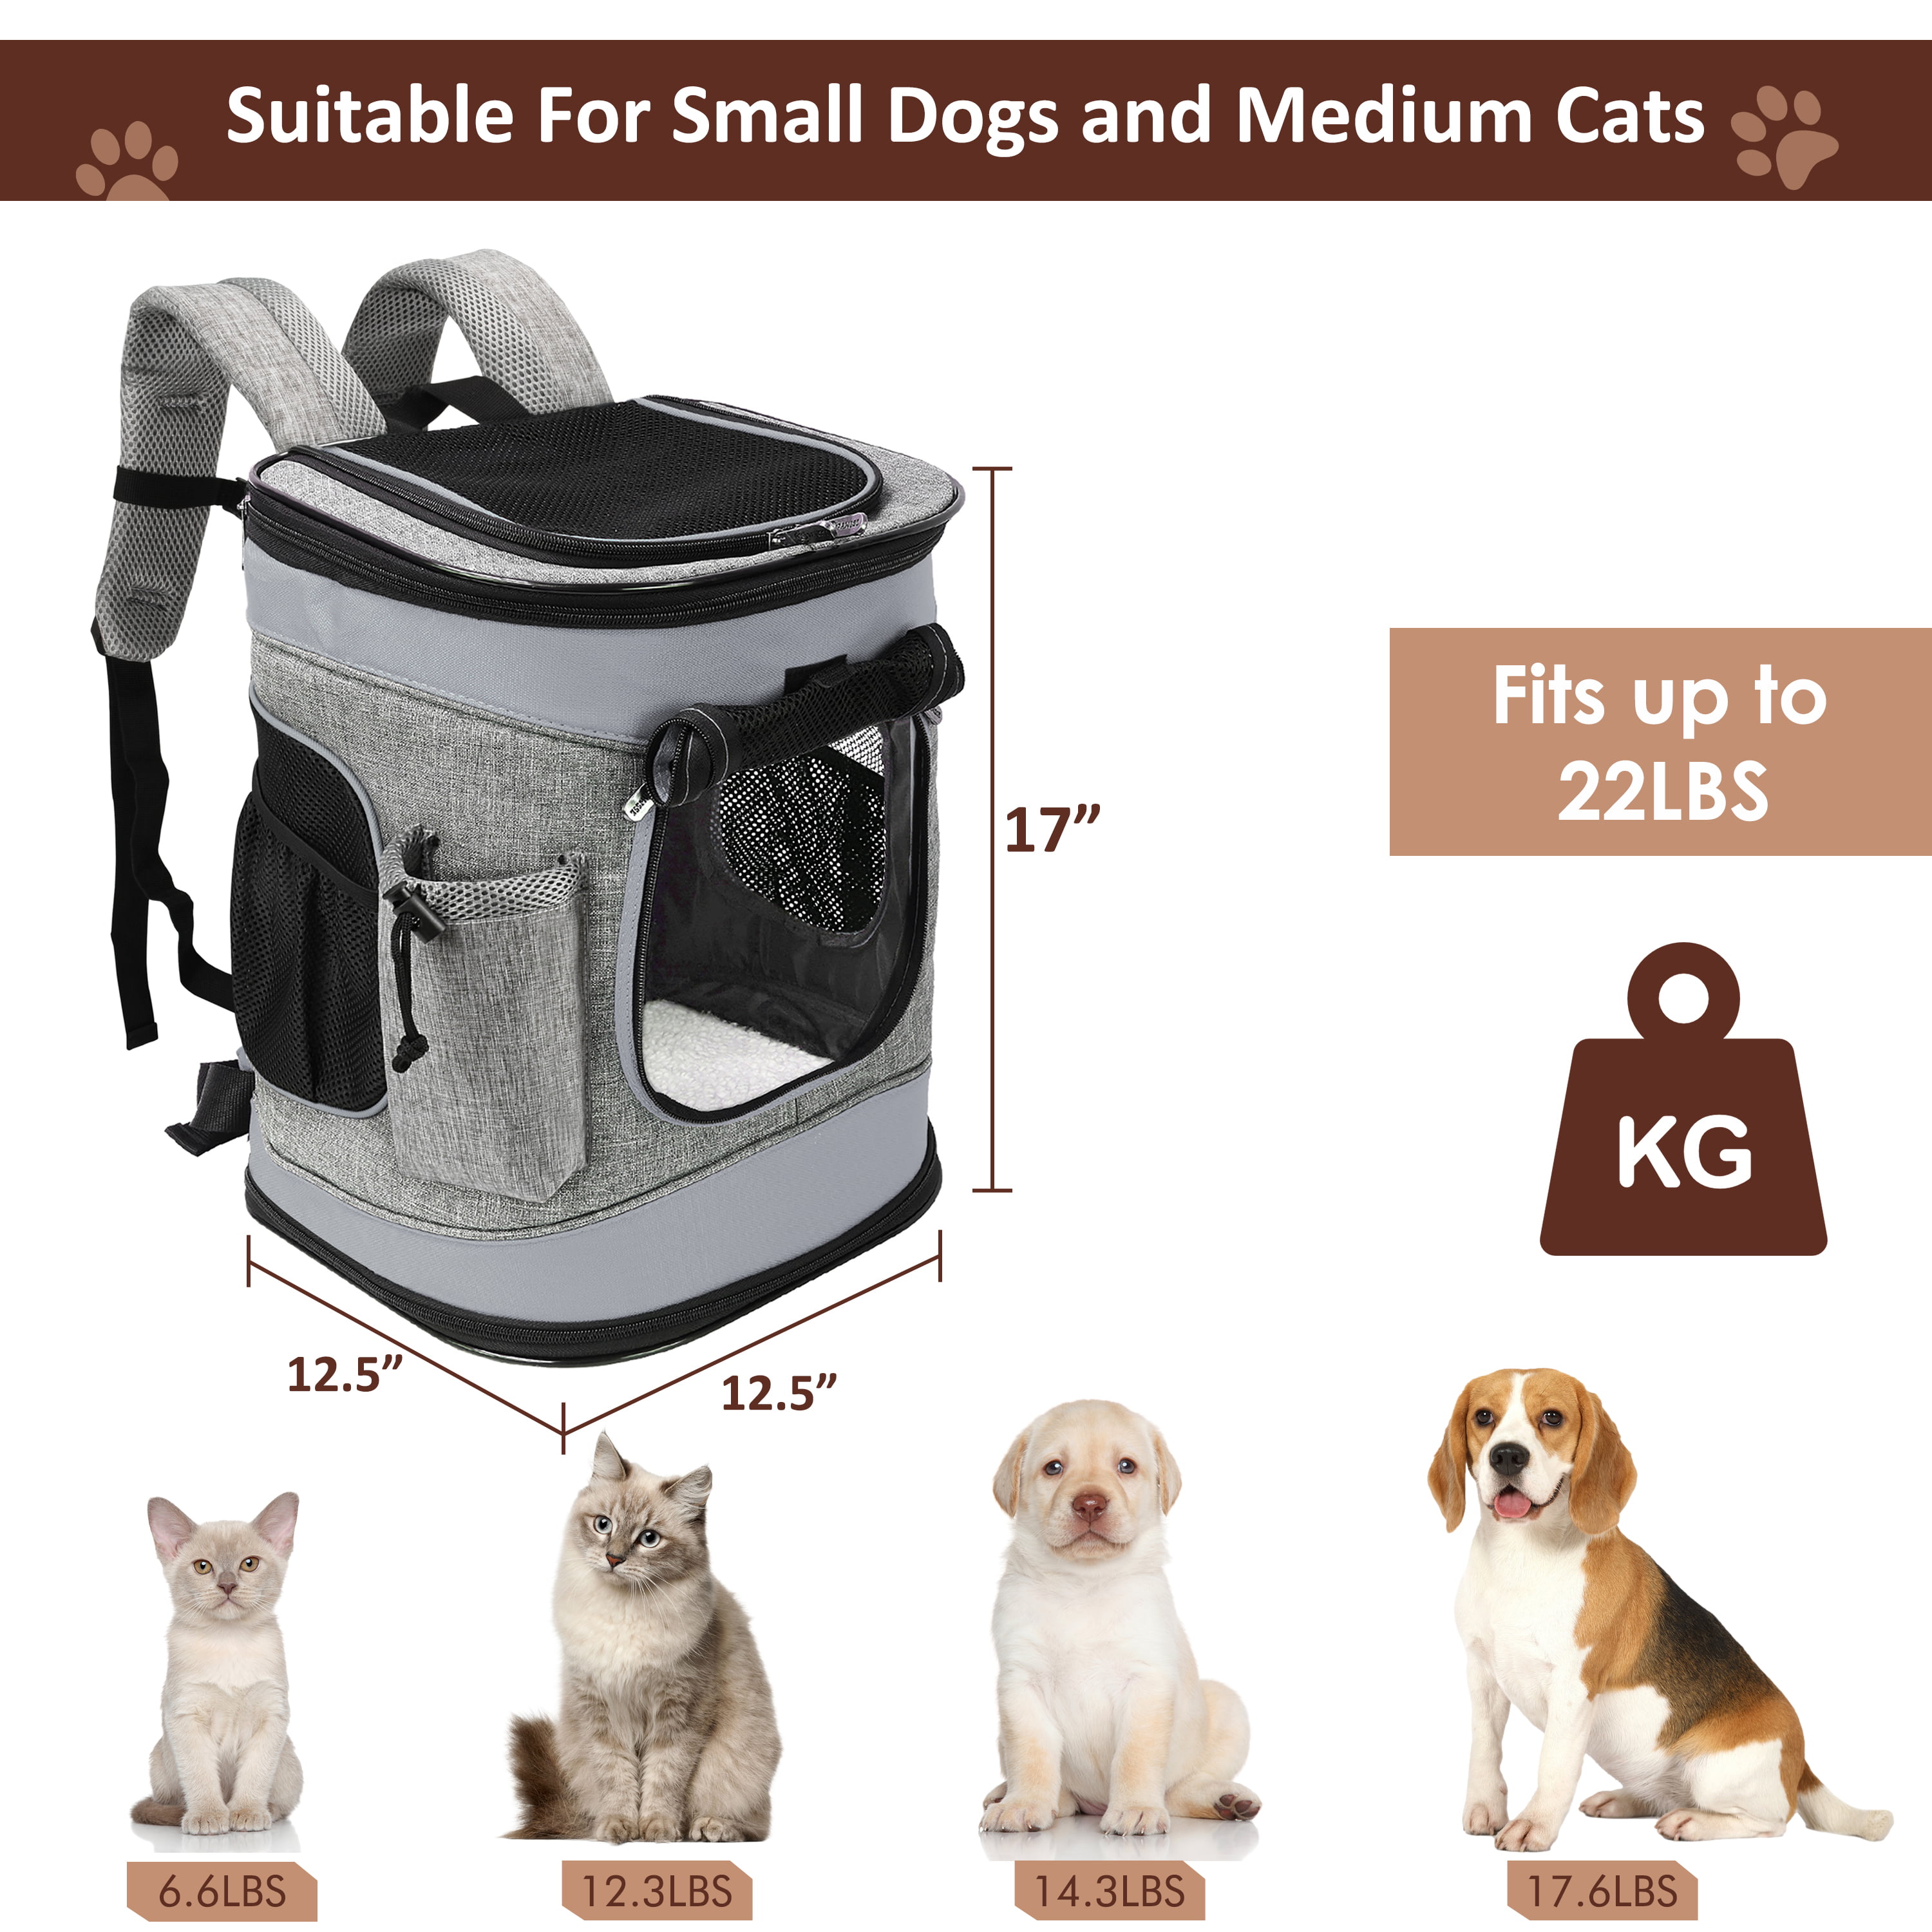 Adriene's Choice Luxury Pet Carrier, Puppy Small Dog Carrier, Cat Carrier  Bag, Waterproof Premium PU Leather Carrying Handbag for Outdoor Travel